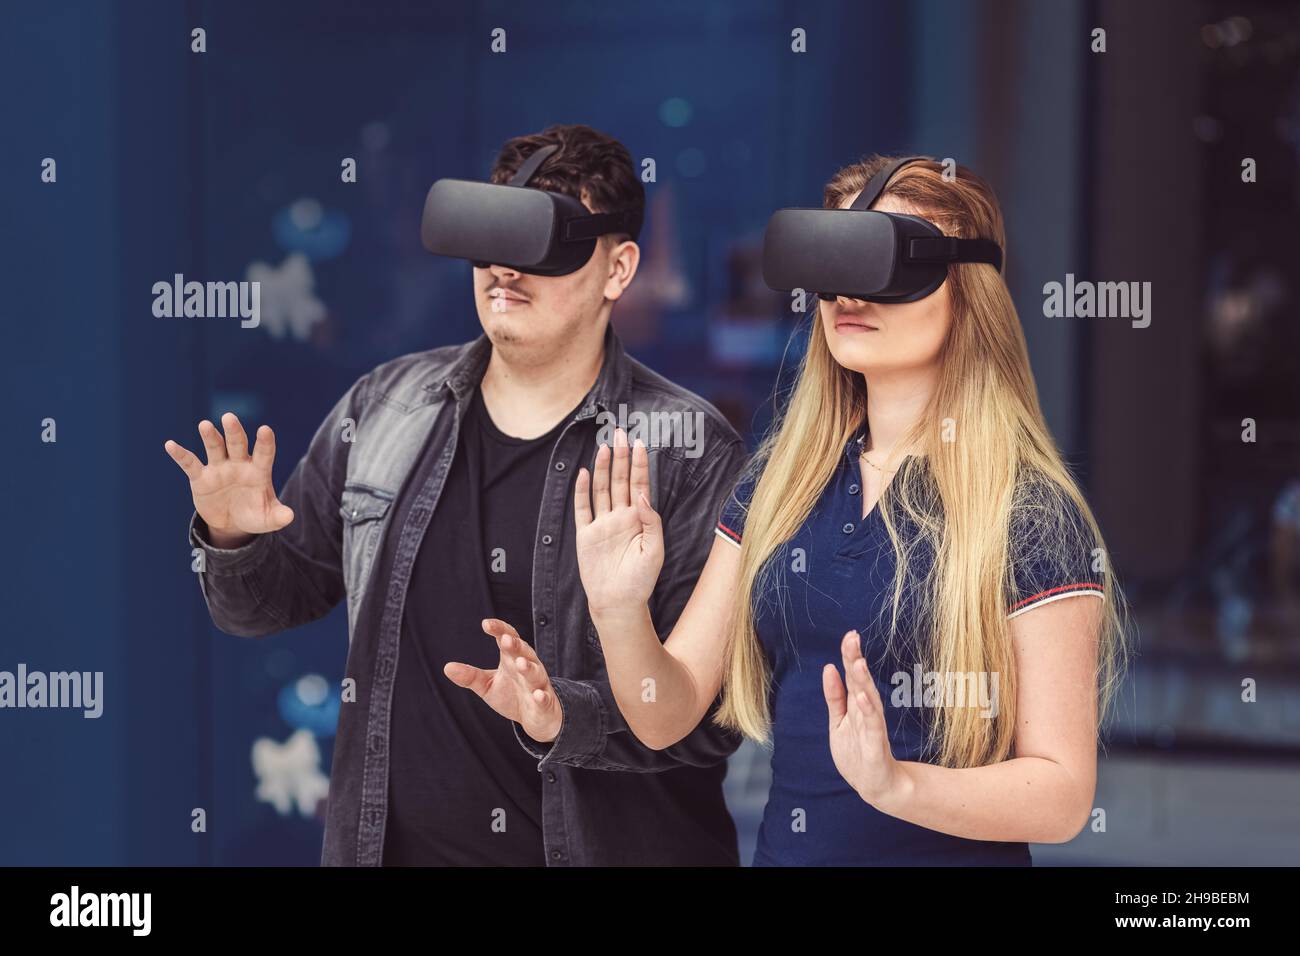 People playing new virtual games on metaverse blockchain technology with vr goggles Stock Photo